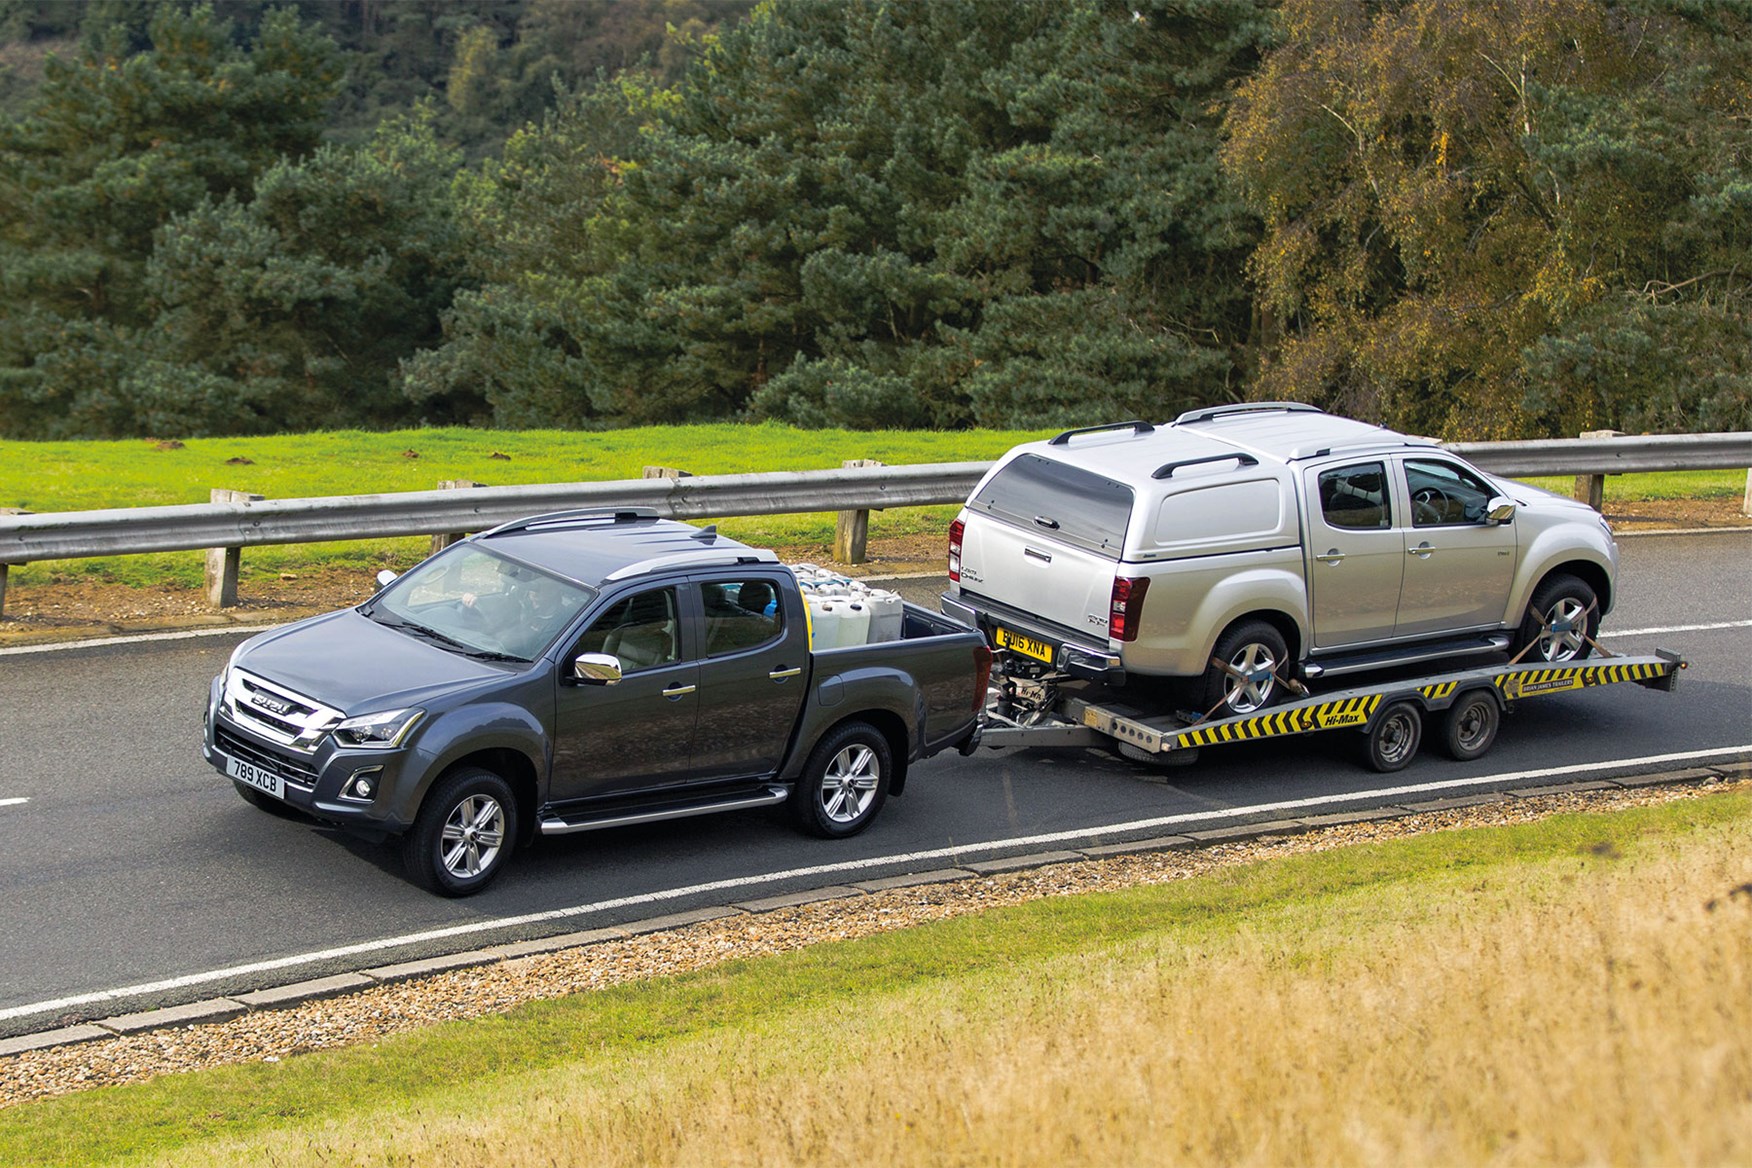 Isuzu D-Max towing capacity - towing another D-Max on a trailer